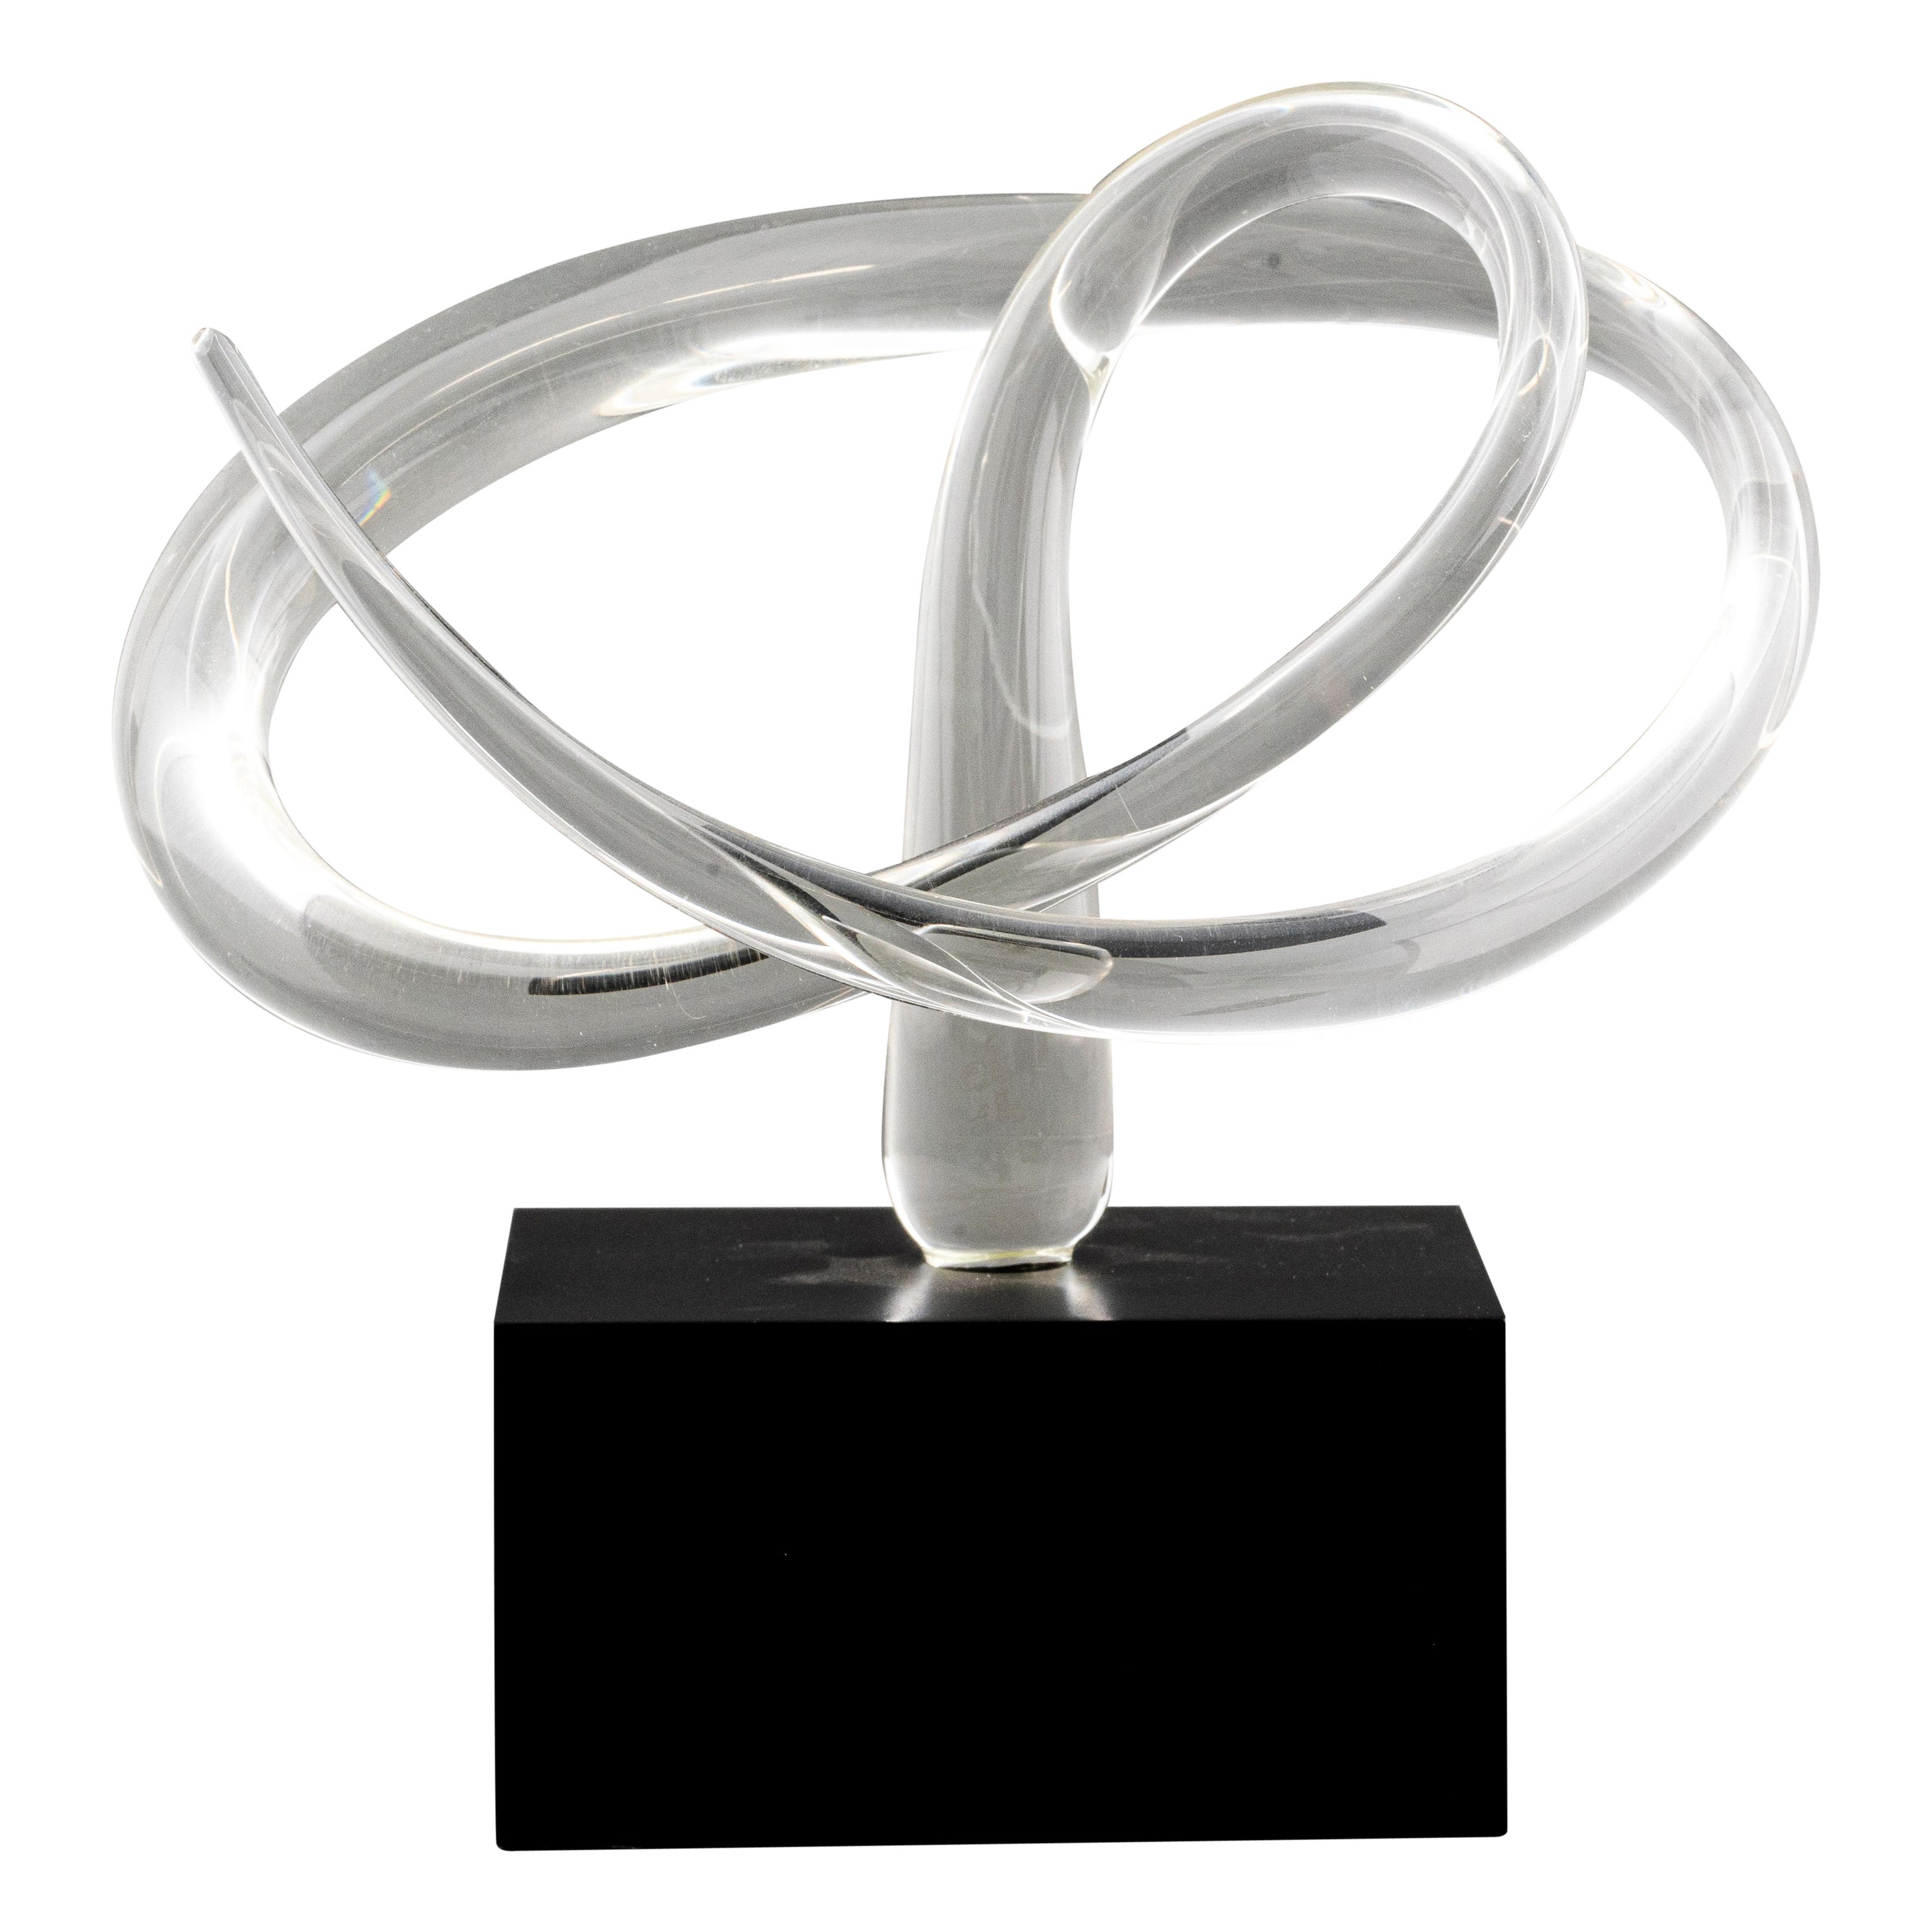 Whitfield & Kelemen Abstract Glass Sculpture For Sale